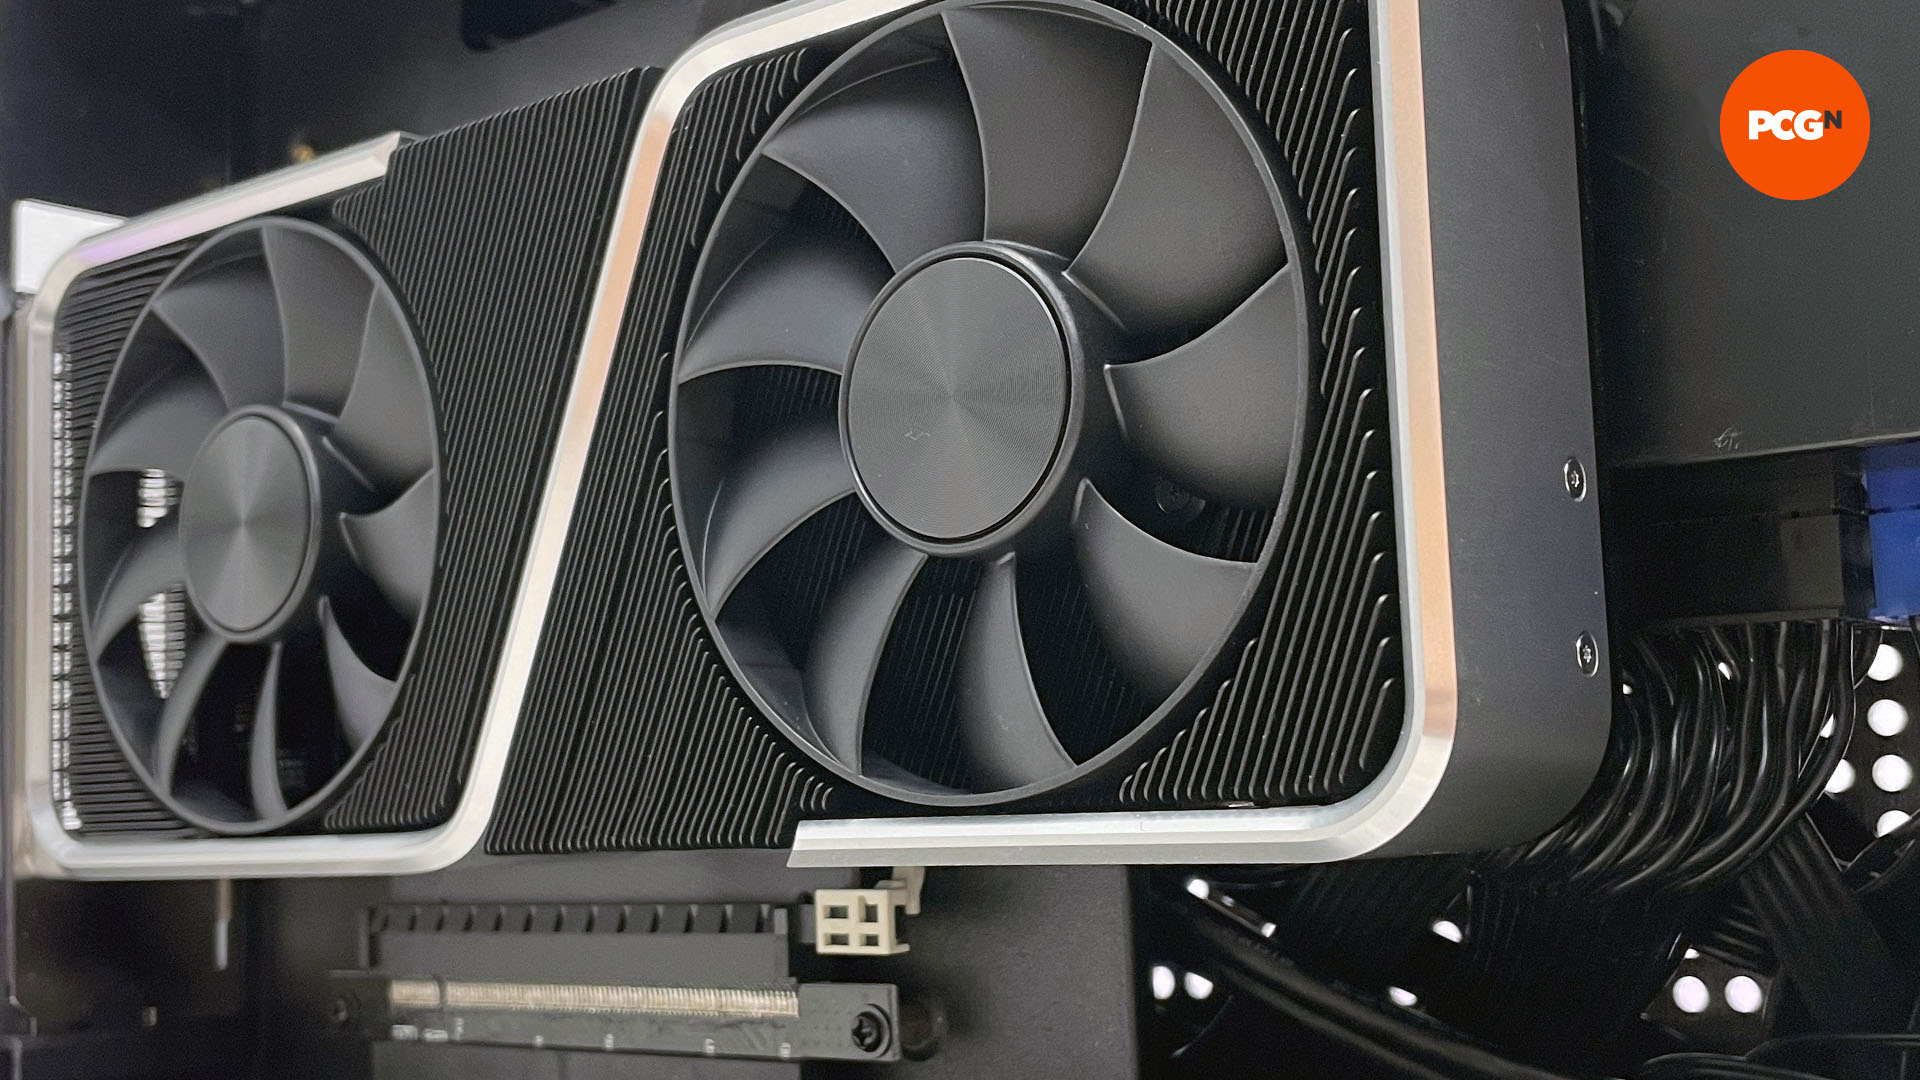 To help with PC cooling, this GPU is vertically mounted